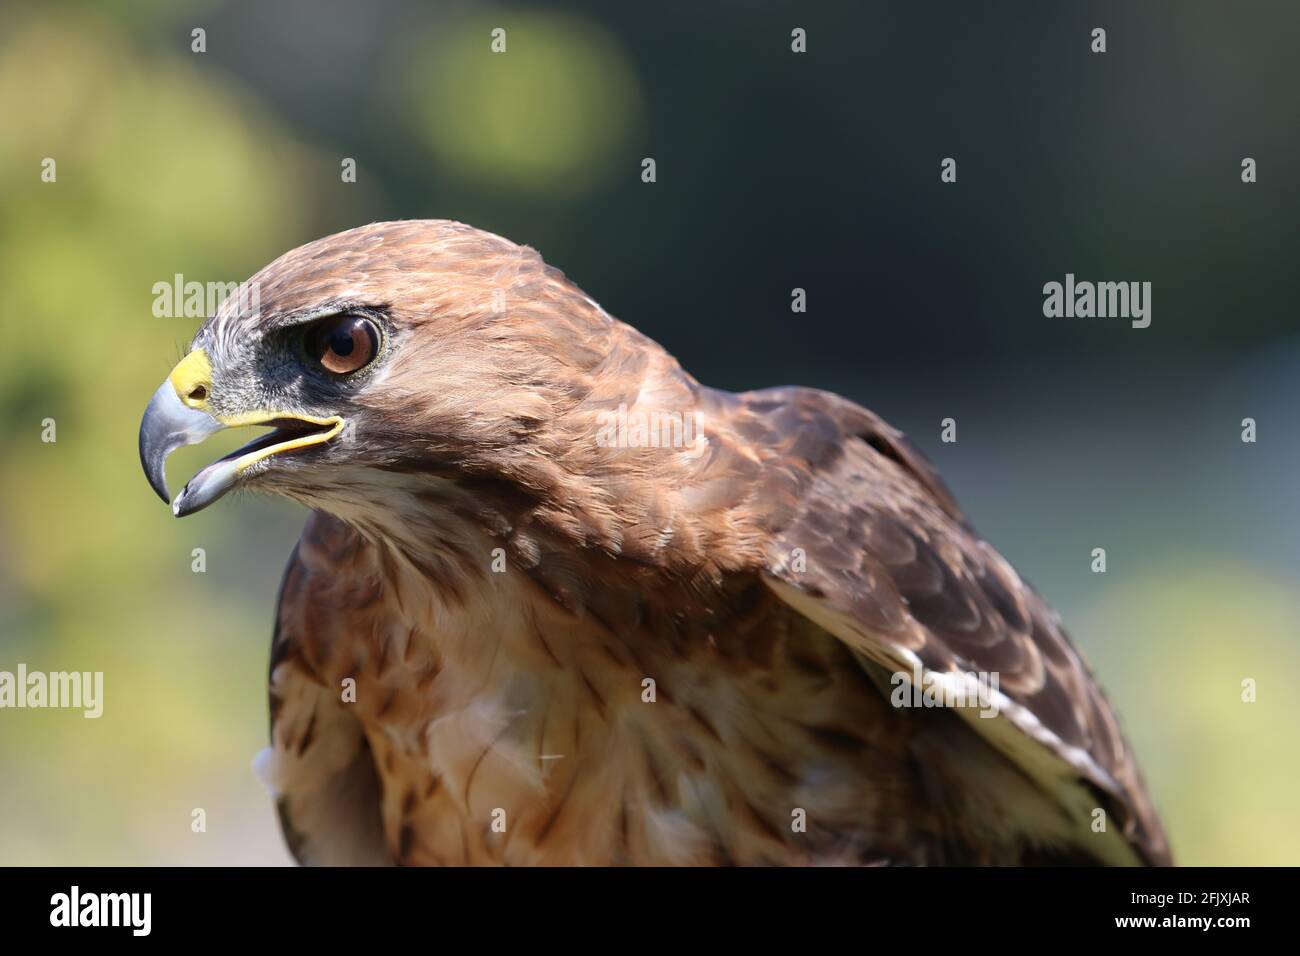 Red-tailed Hawk bird of prey side profile close-up Stock Photo